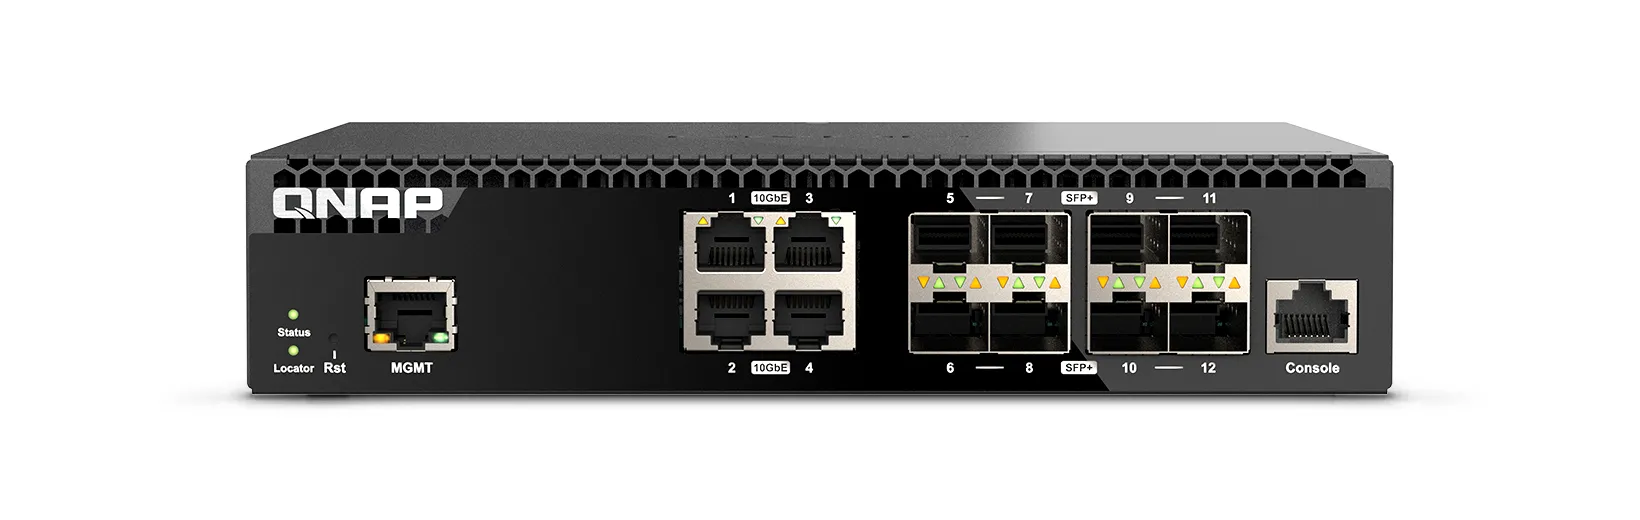 Achat Switchs et Hubs QNAP QSW-M3212R-8S4T Managed Switch 12 port of 10GbE sur hello RSE